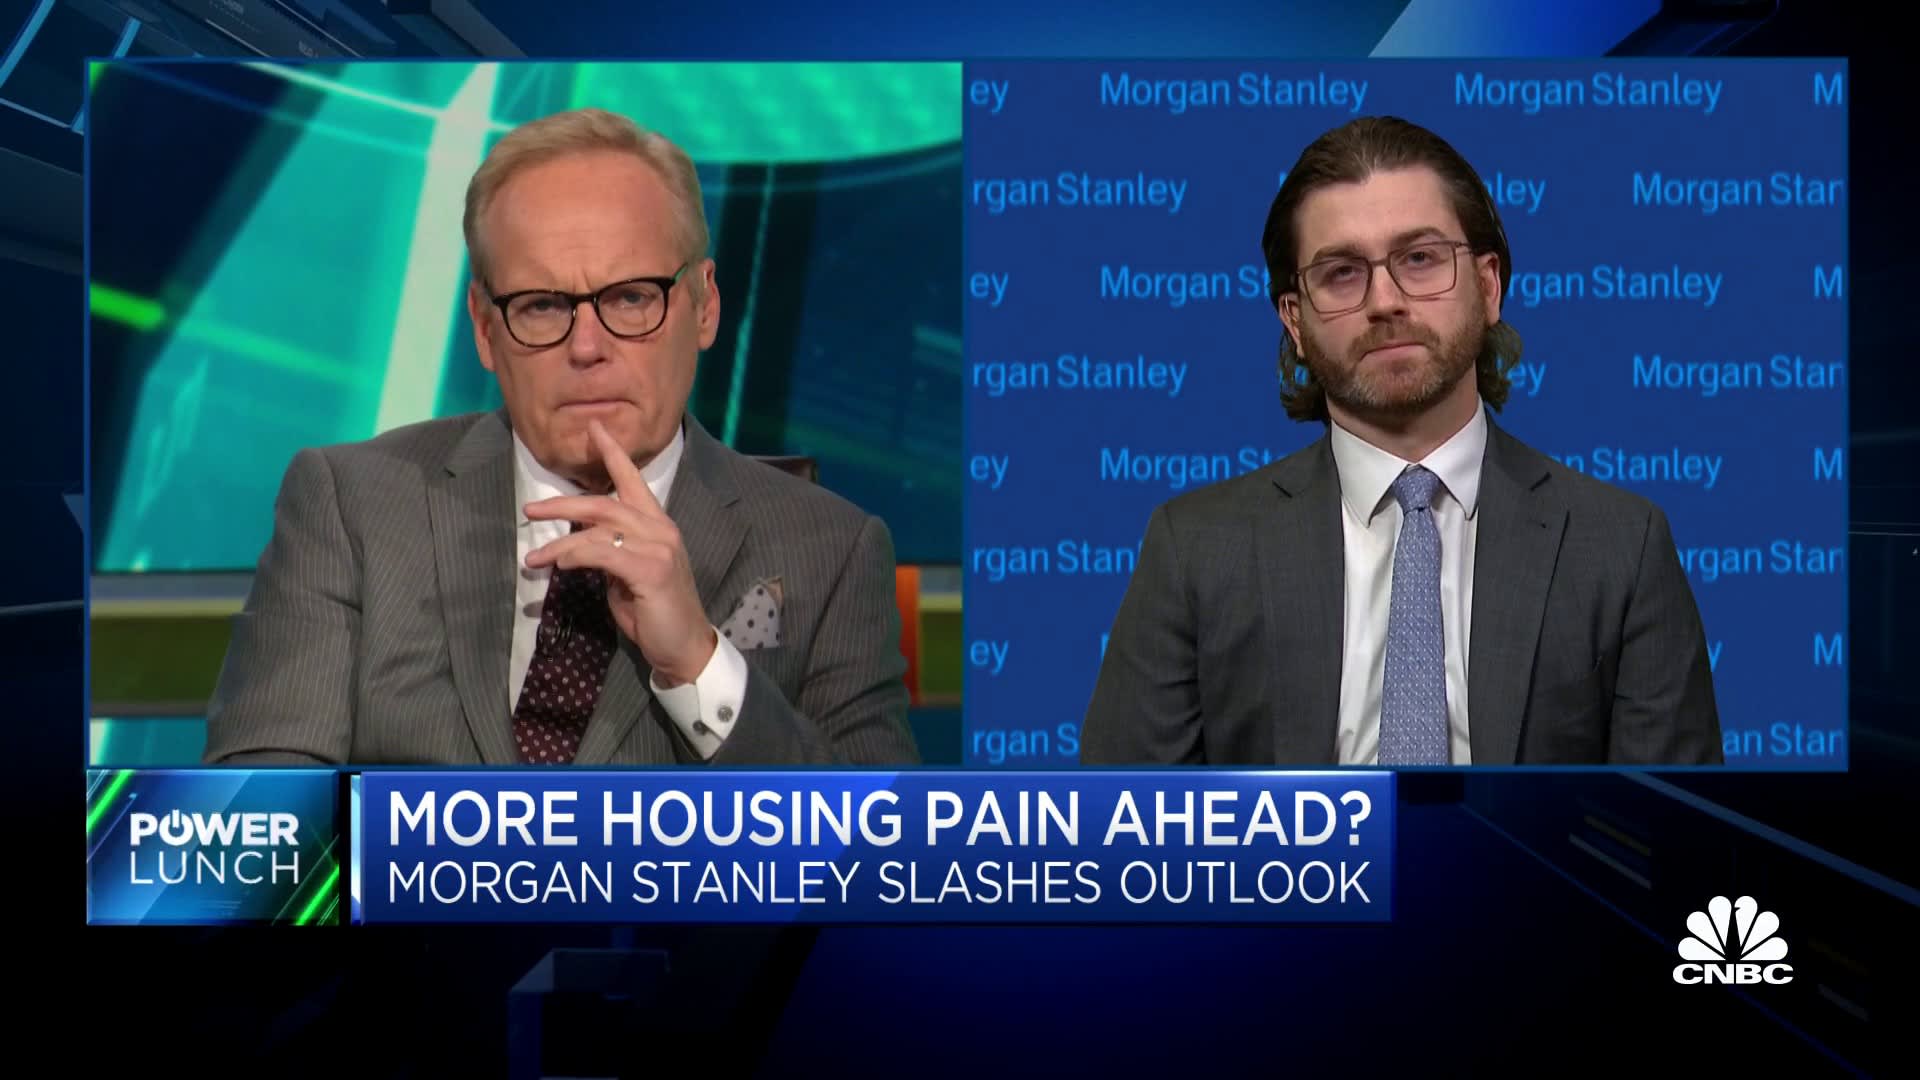 Watch CNBC’s full interview with Morgan Stanley’s Jim Egan